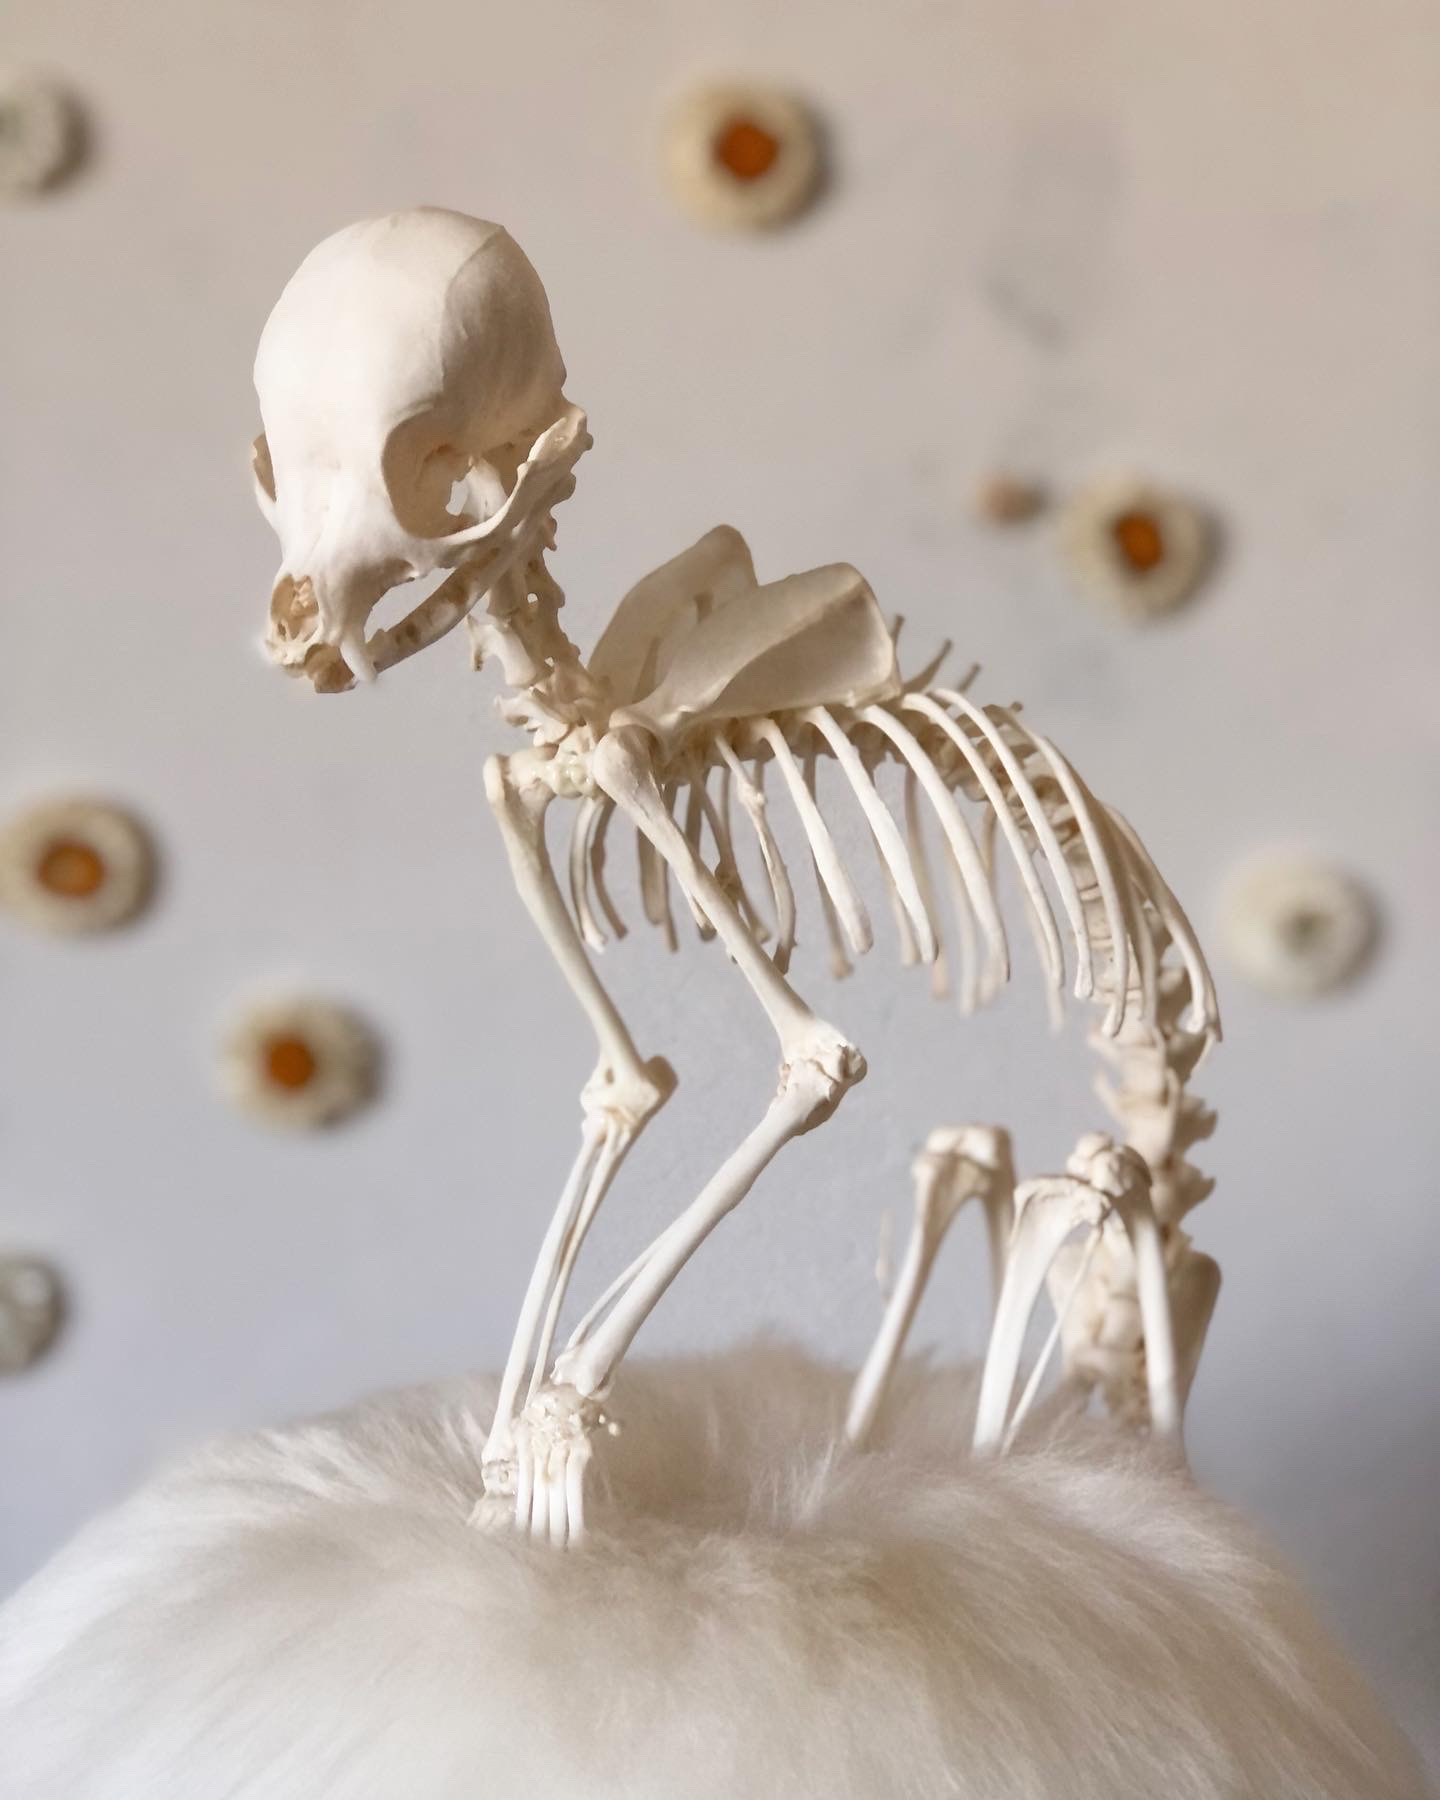 Small dog's fully articulated skeleton